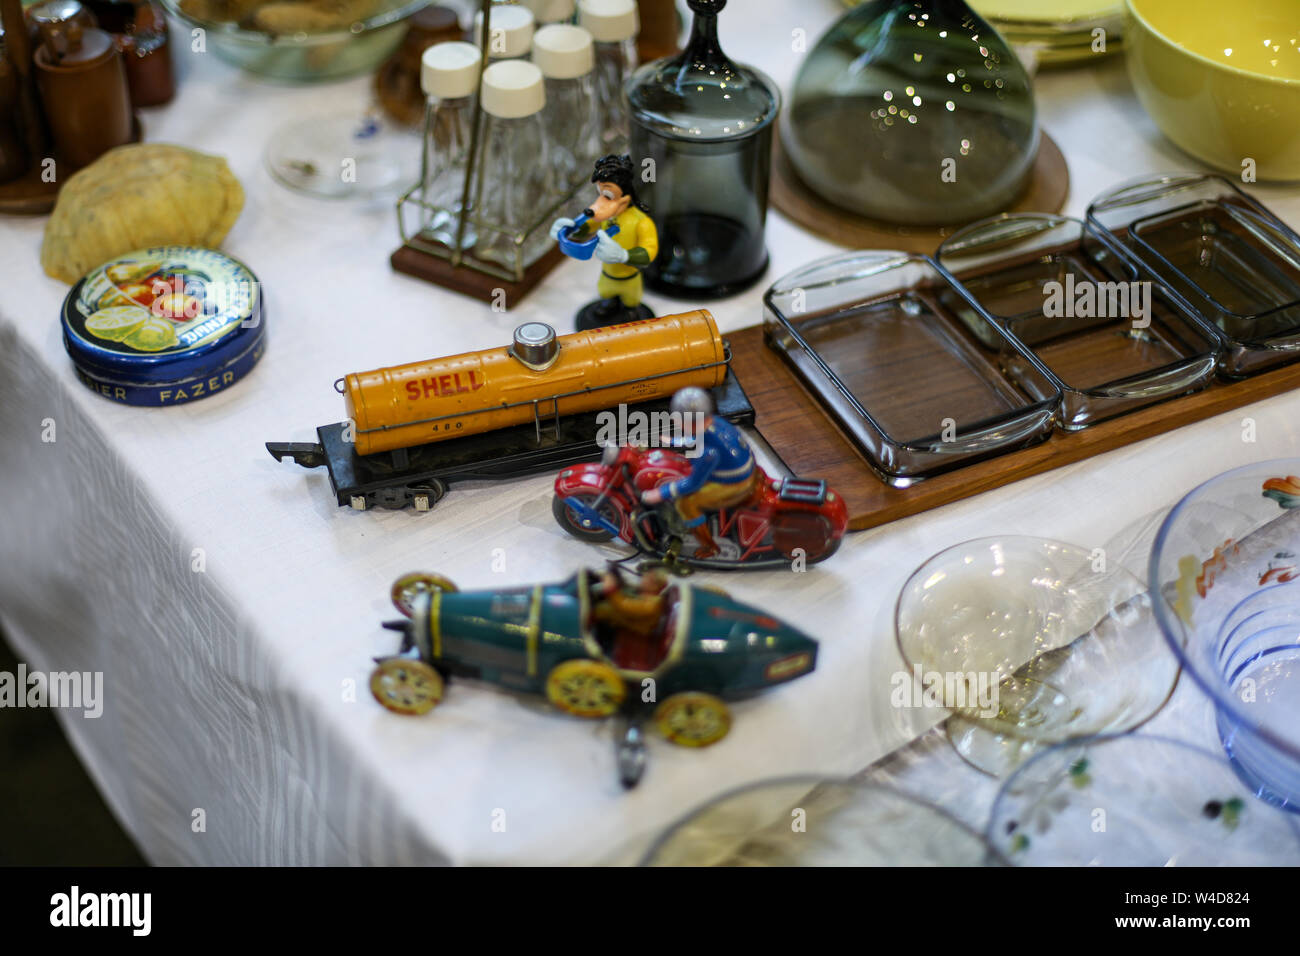 Vintage Shell toy tank wagon and other old items displayed at Retro and Vintage Design Expo in Helsinki, Finland Stock Photo